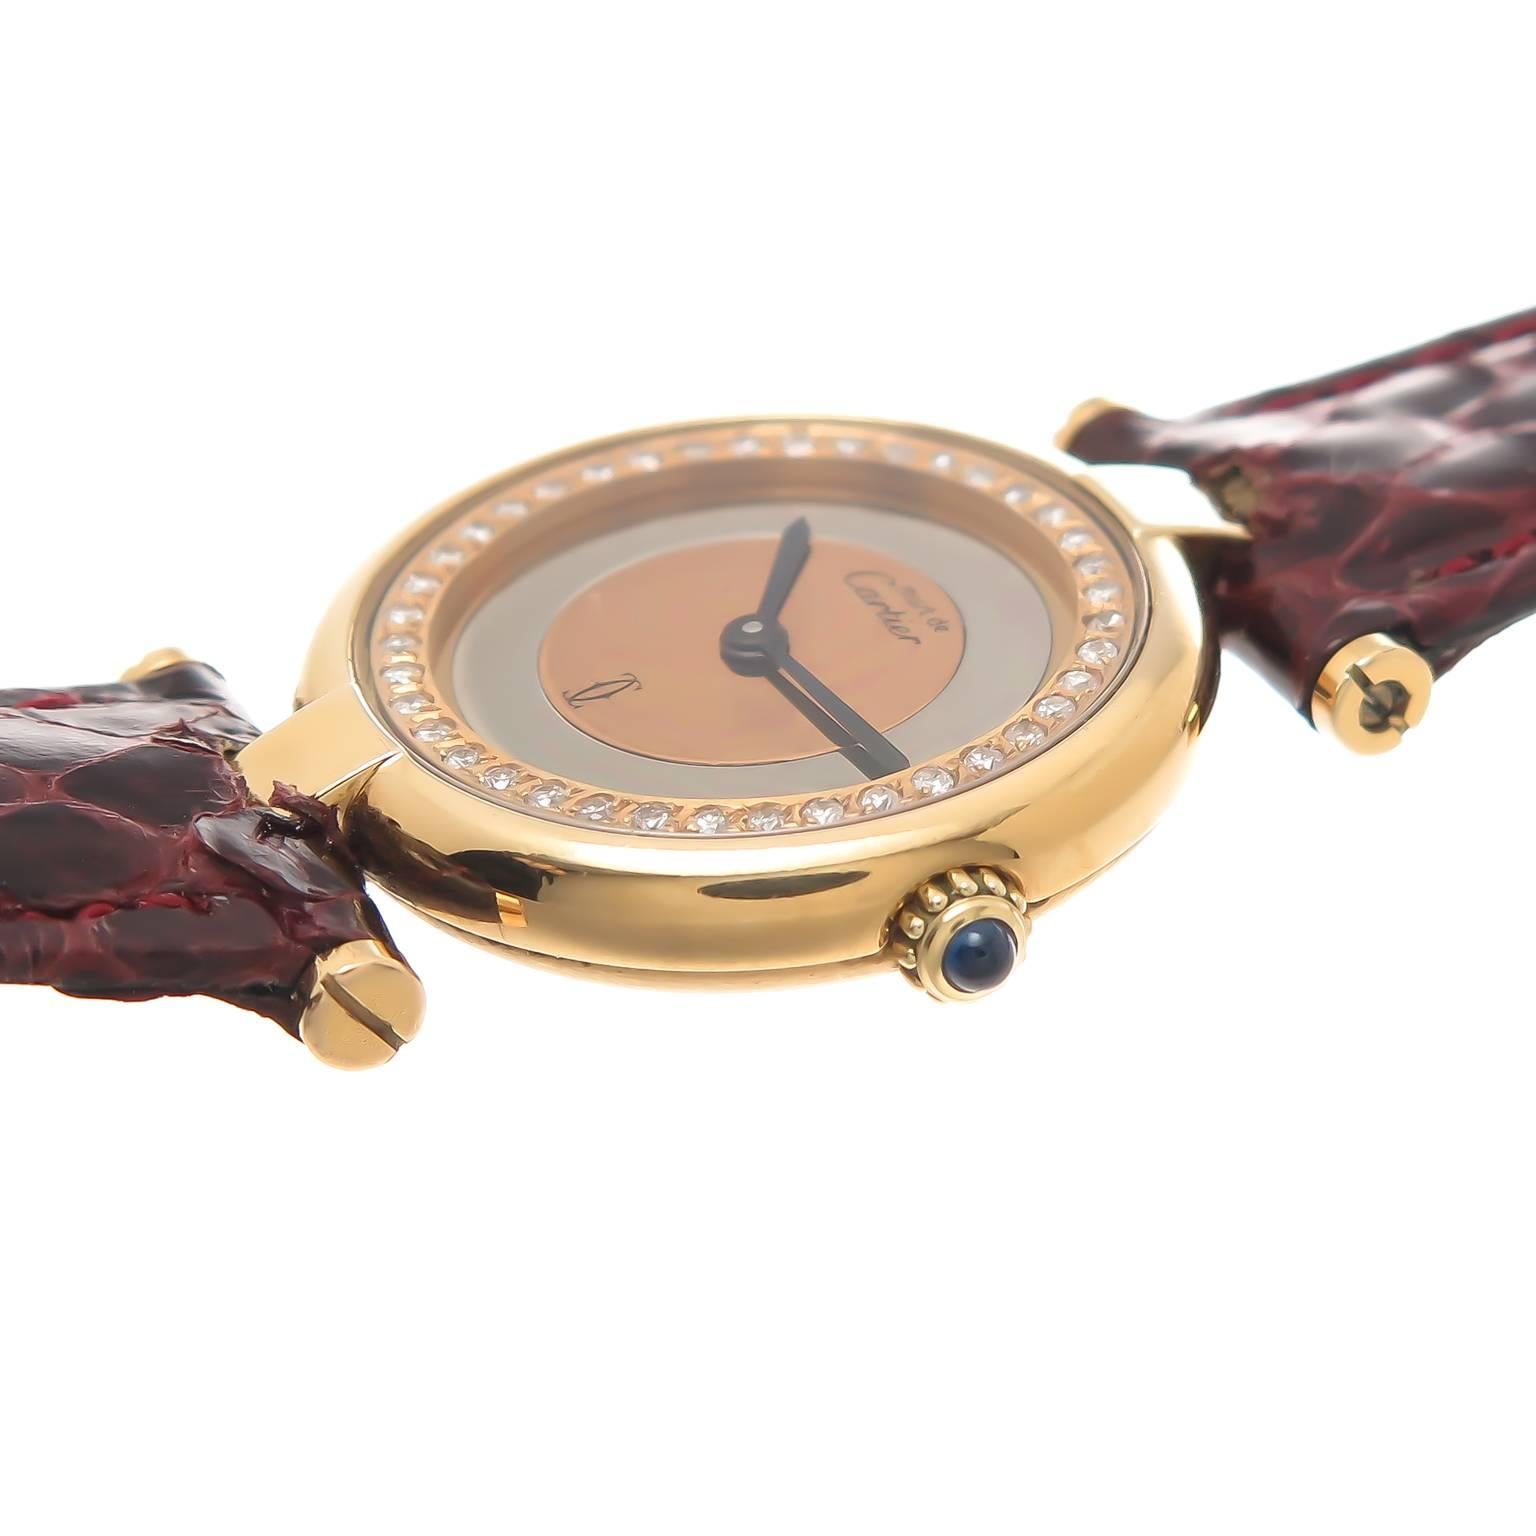 Circa 1990s Cartier Vendome Ladies Vermeil Wrist Watch with Diamonds on the inner Bezel. 24 MM Gold Plated Sterling Silver water resistant case. Quartz Movement, Sapphire Crown. Two Color Silver and Pink inner Dial surrounded by Full cut, round